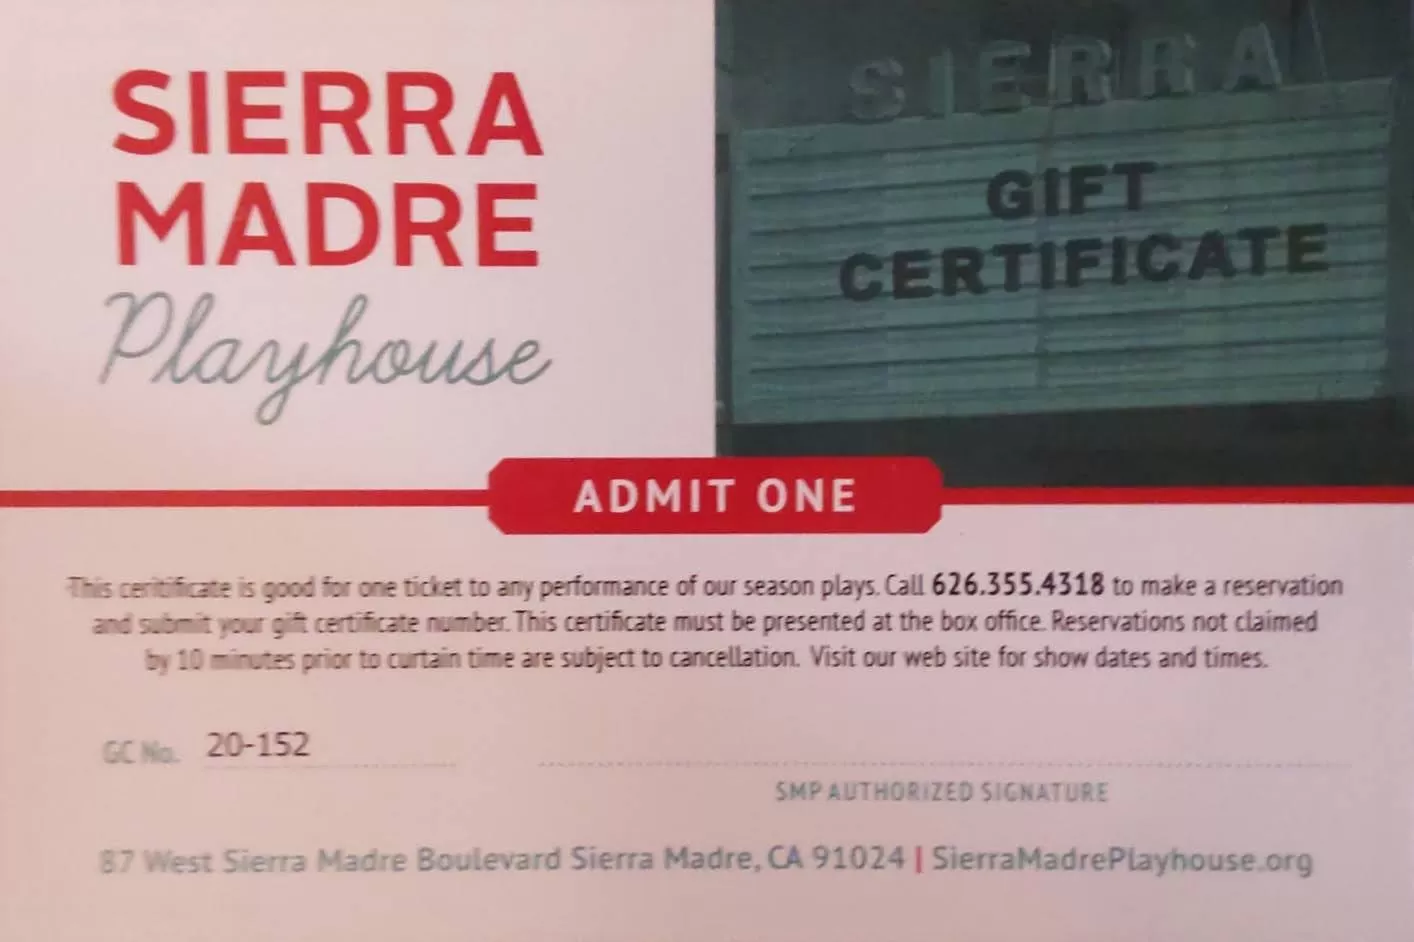 PURCHASE A GIFT CERTIFICATE FROM THE SIERRA MADRE PLAYHOUSE!